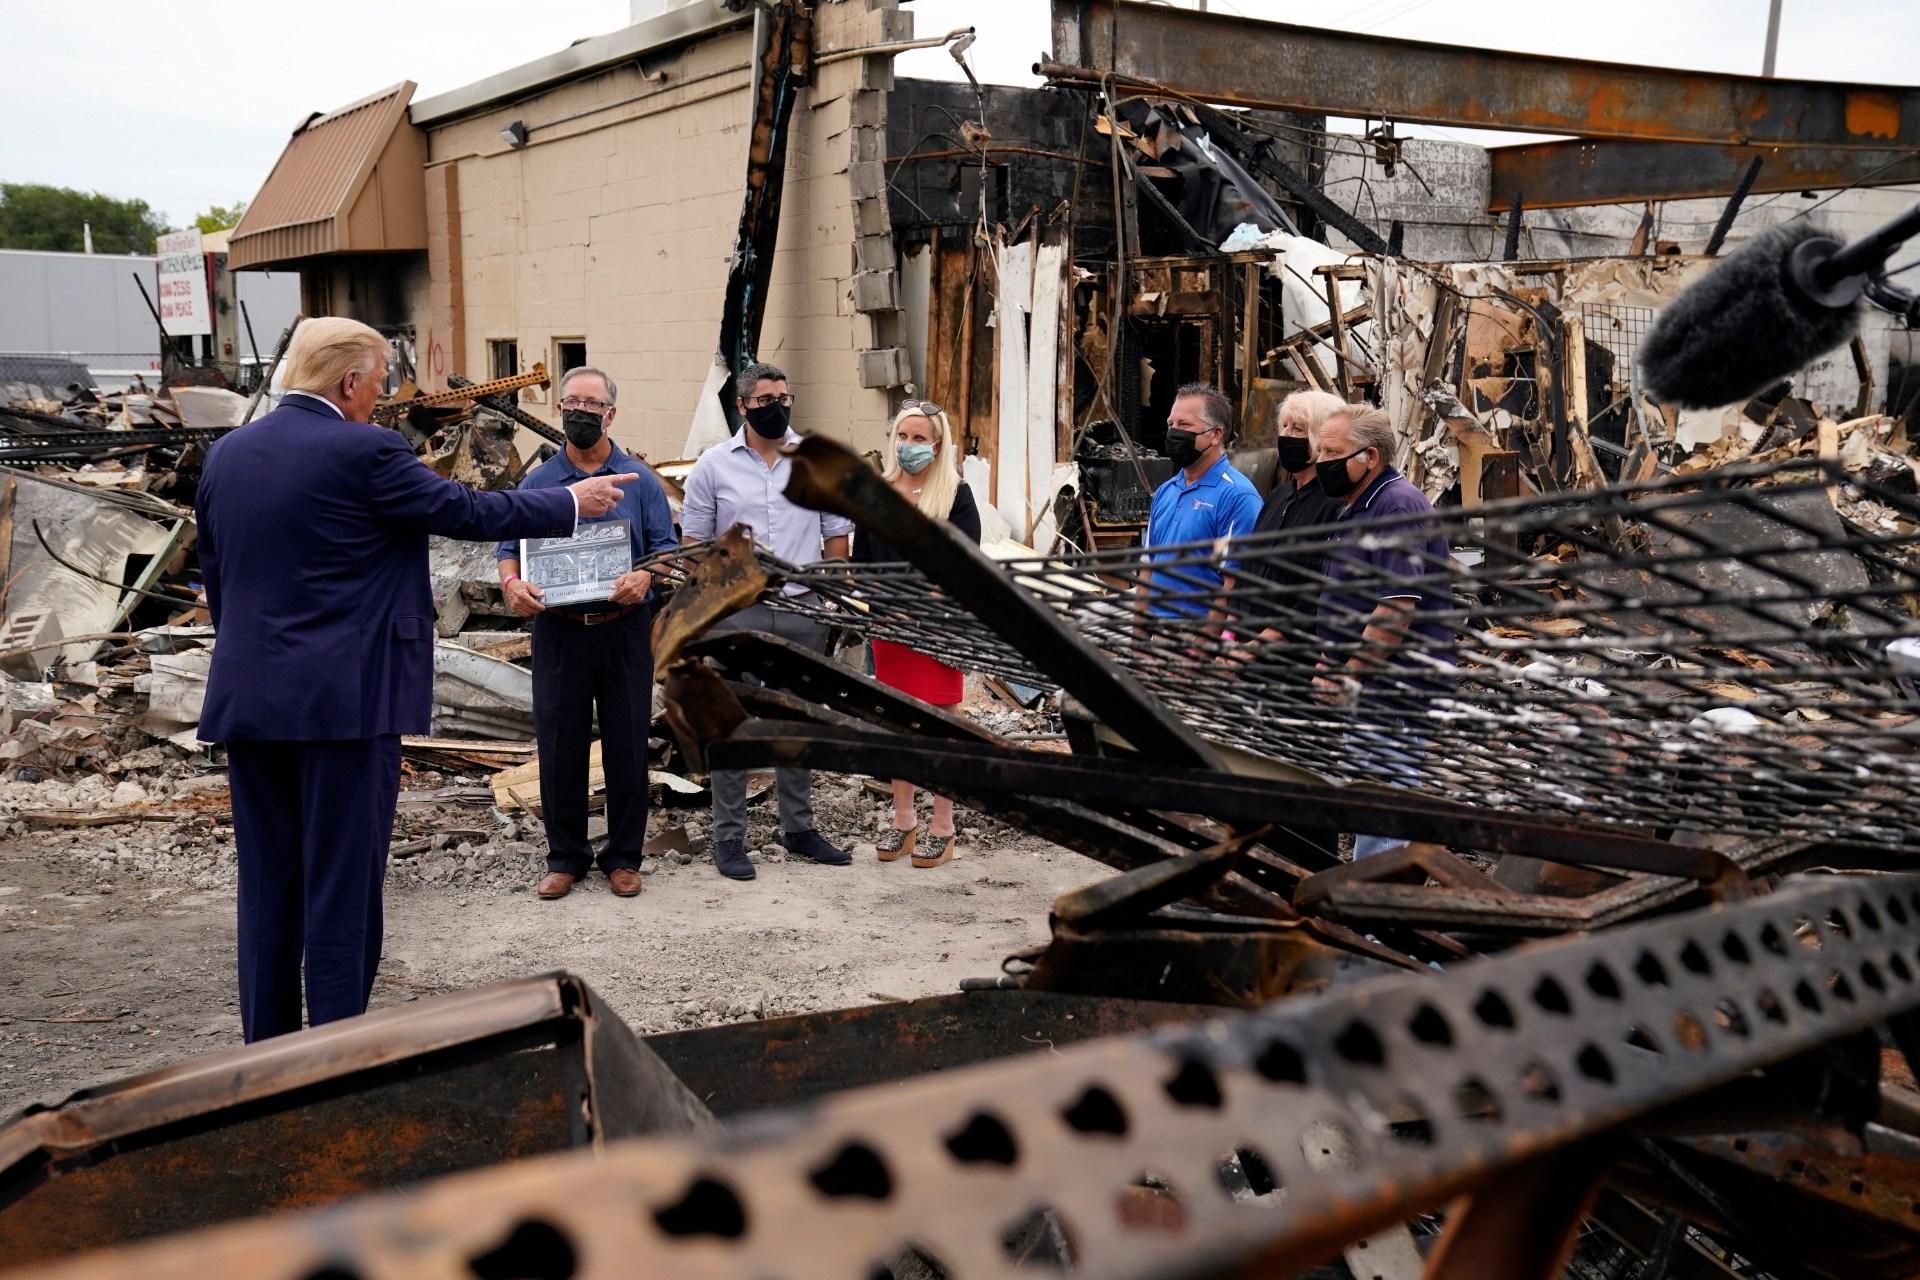 President Donald Trump talks to business owners Tuesday, Sept. 1, 2020, as he tours an area damaged during demonstrations after a police officer shot Jacob Blake in Kenosha, Wis. (AP Photo / Evan Vucci)